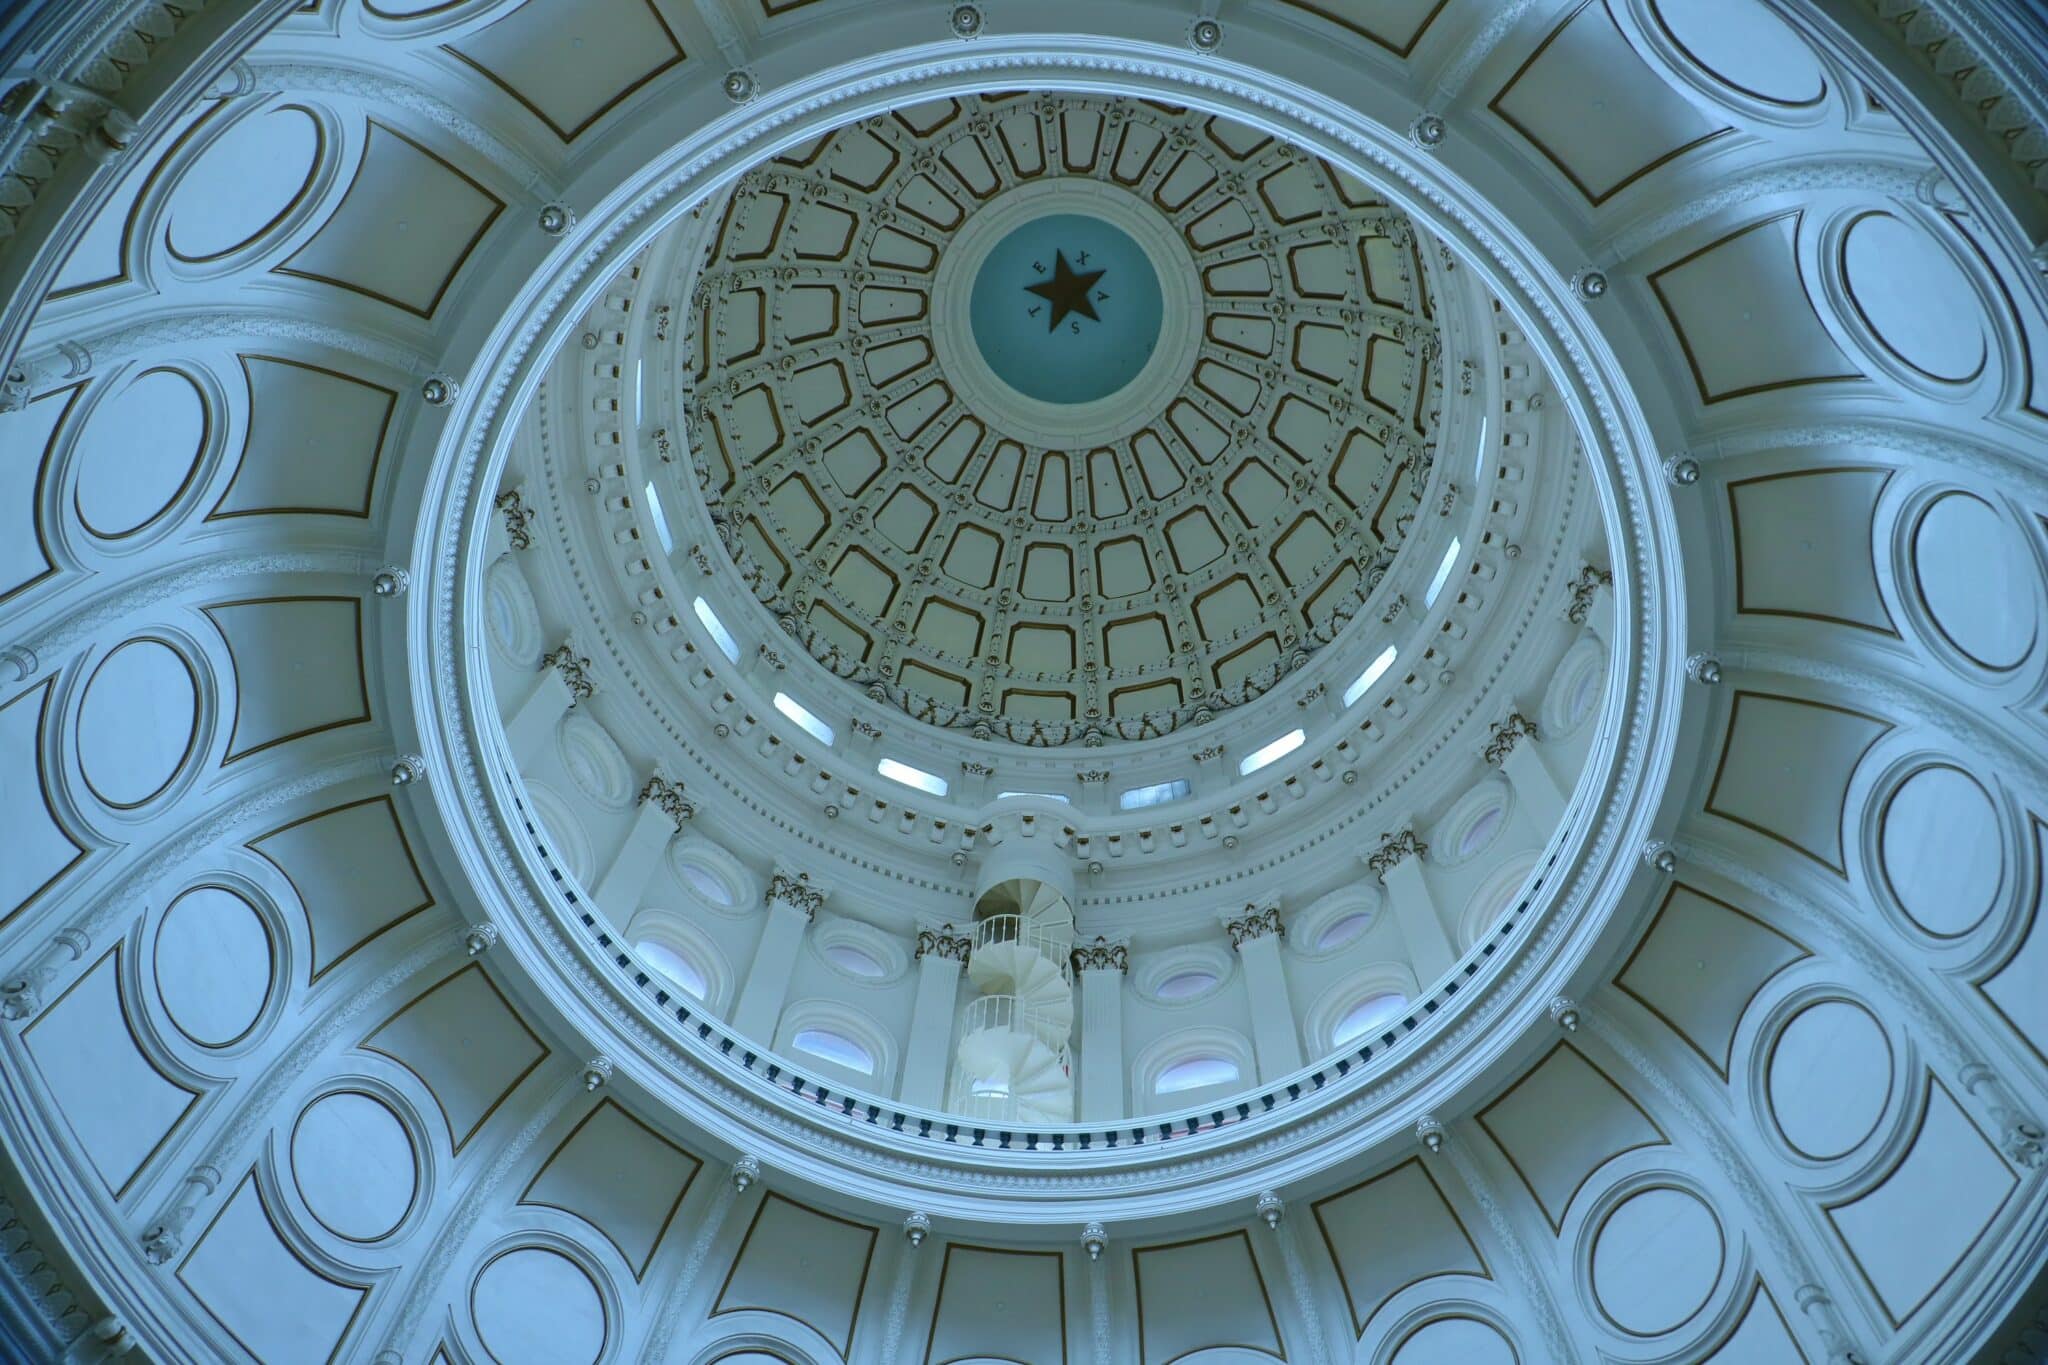 Looking up at the dome from the floor of the Texas State Capitol